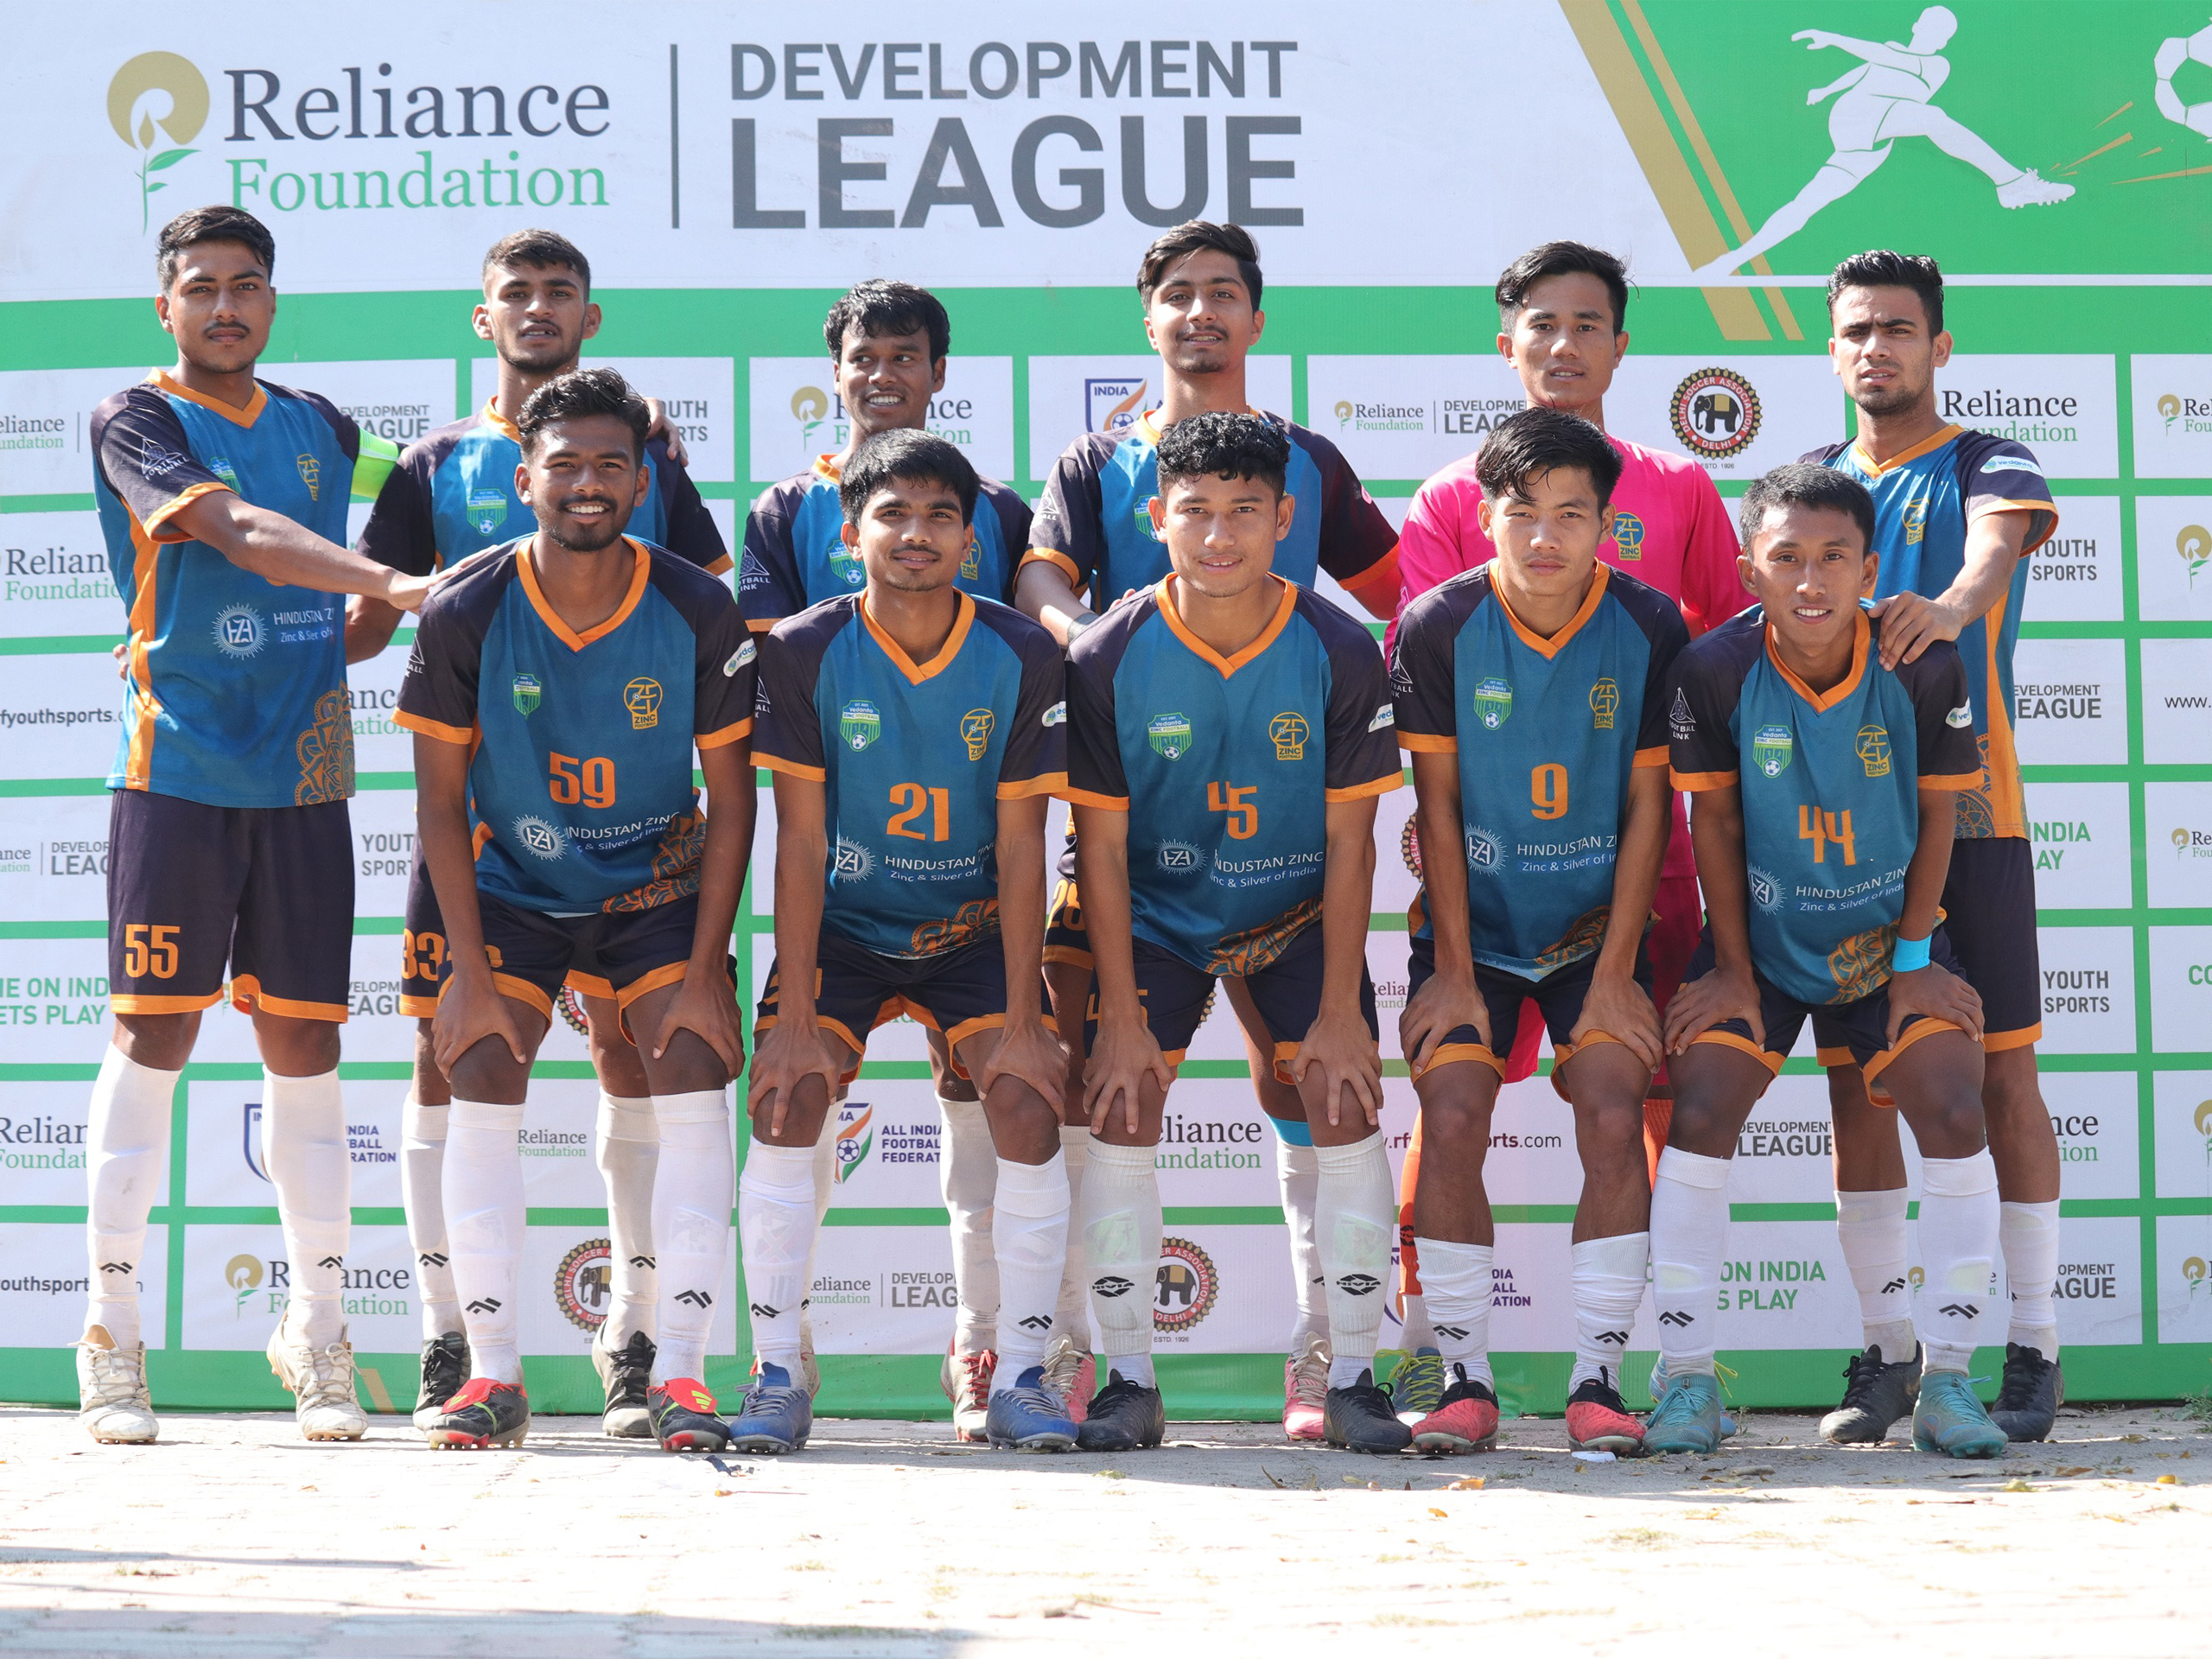 OUR JOURNEY AT THE RELIANCE FOUNDATION DEVELOPMENT LEAGUE S3